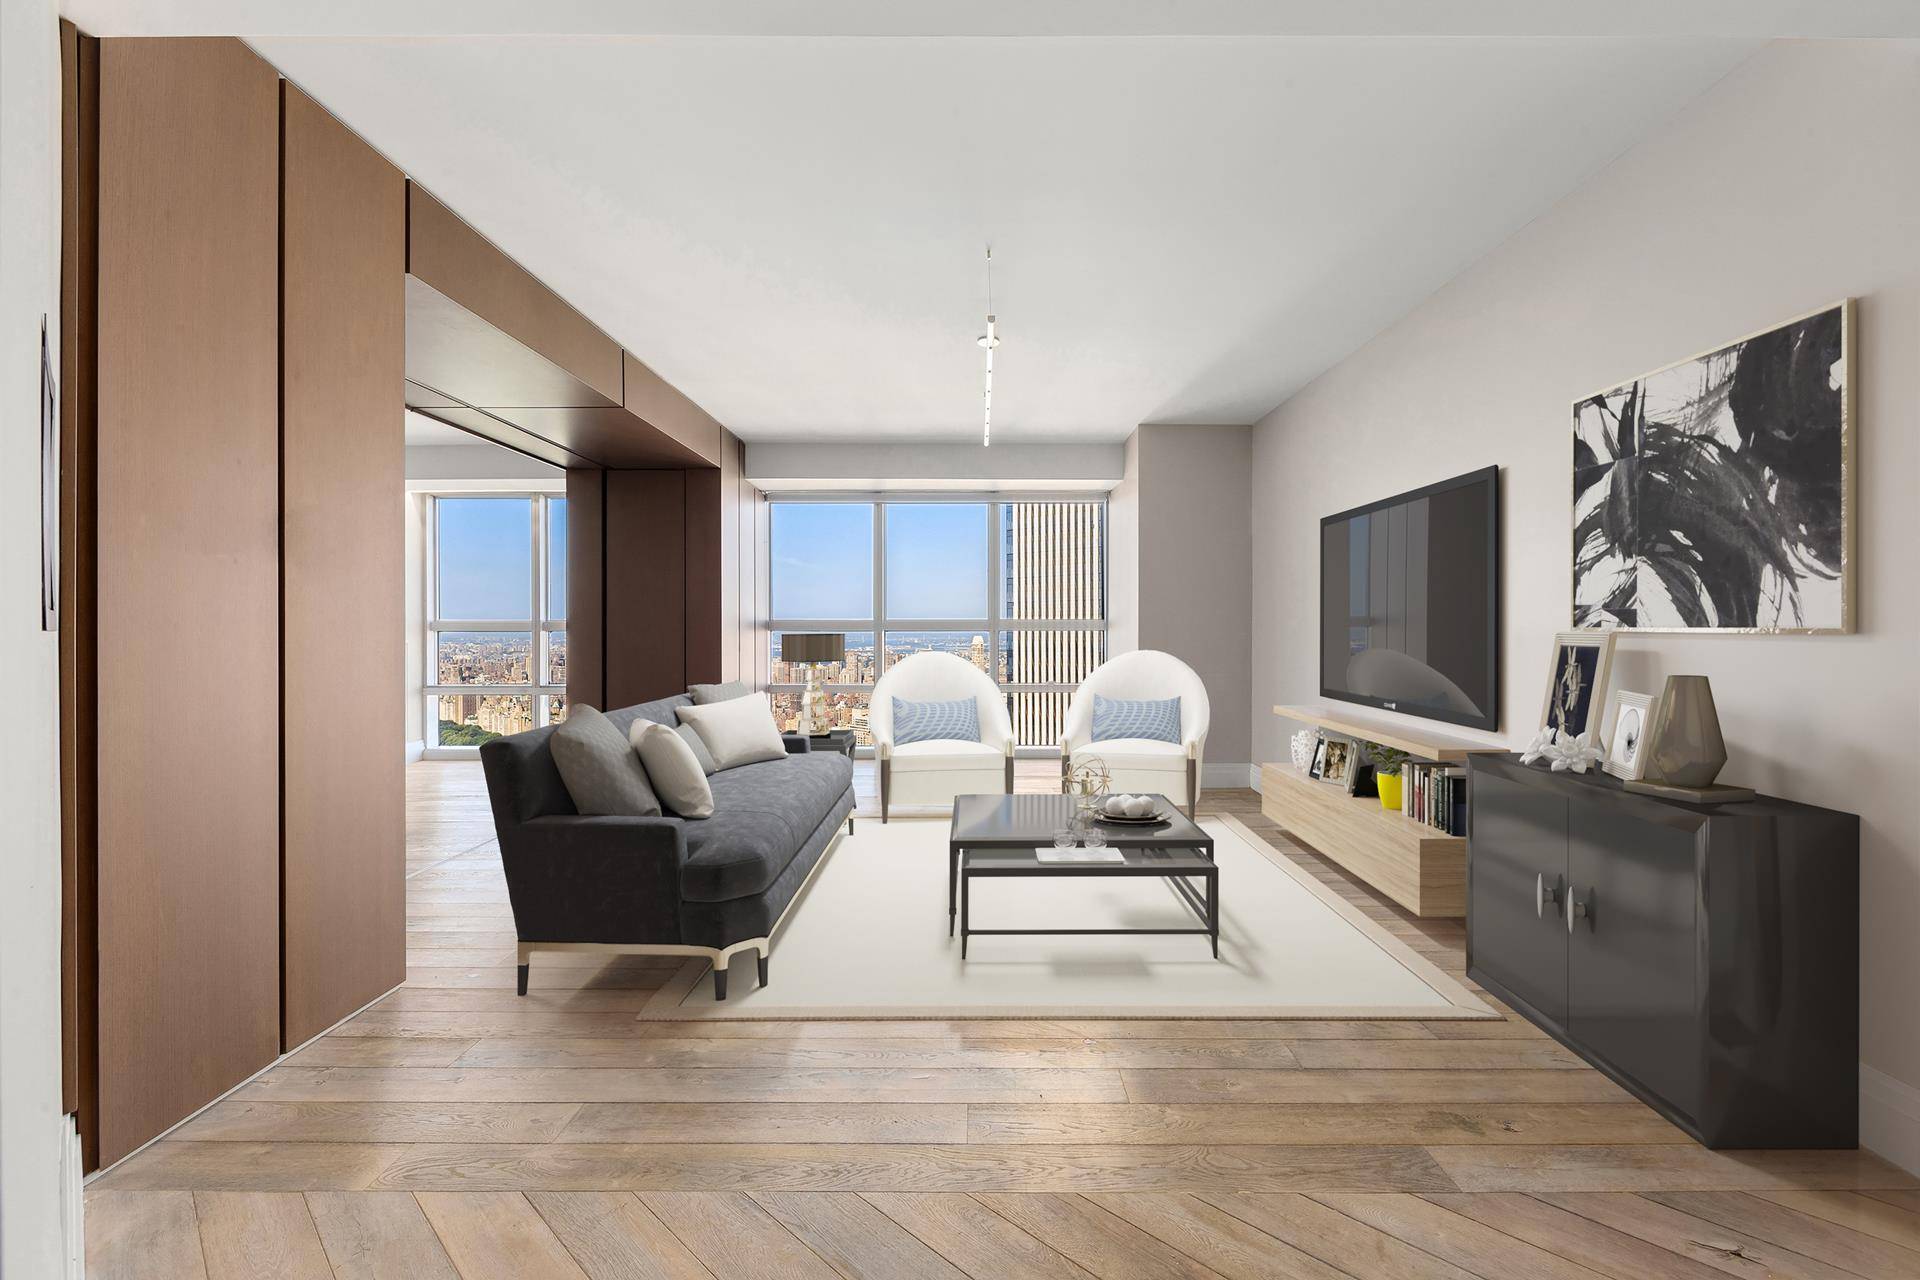 Elevate your lifestyle in a Duplex Penthouse showplace perched atop the Metropolitan Tower Condominium in Midtown !